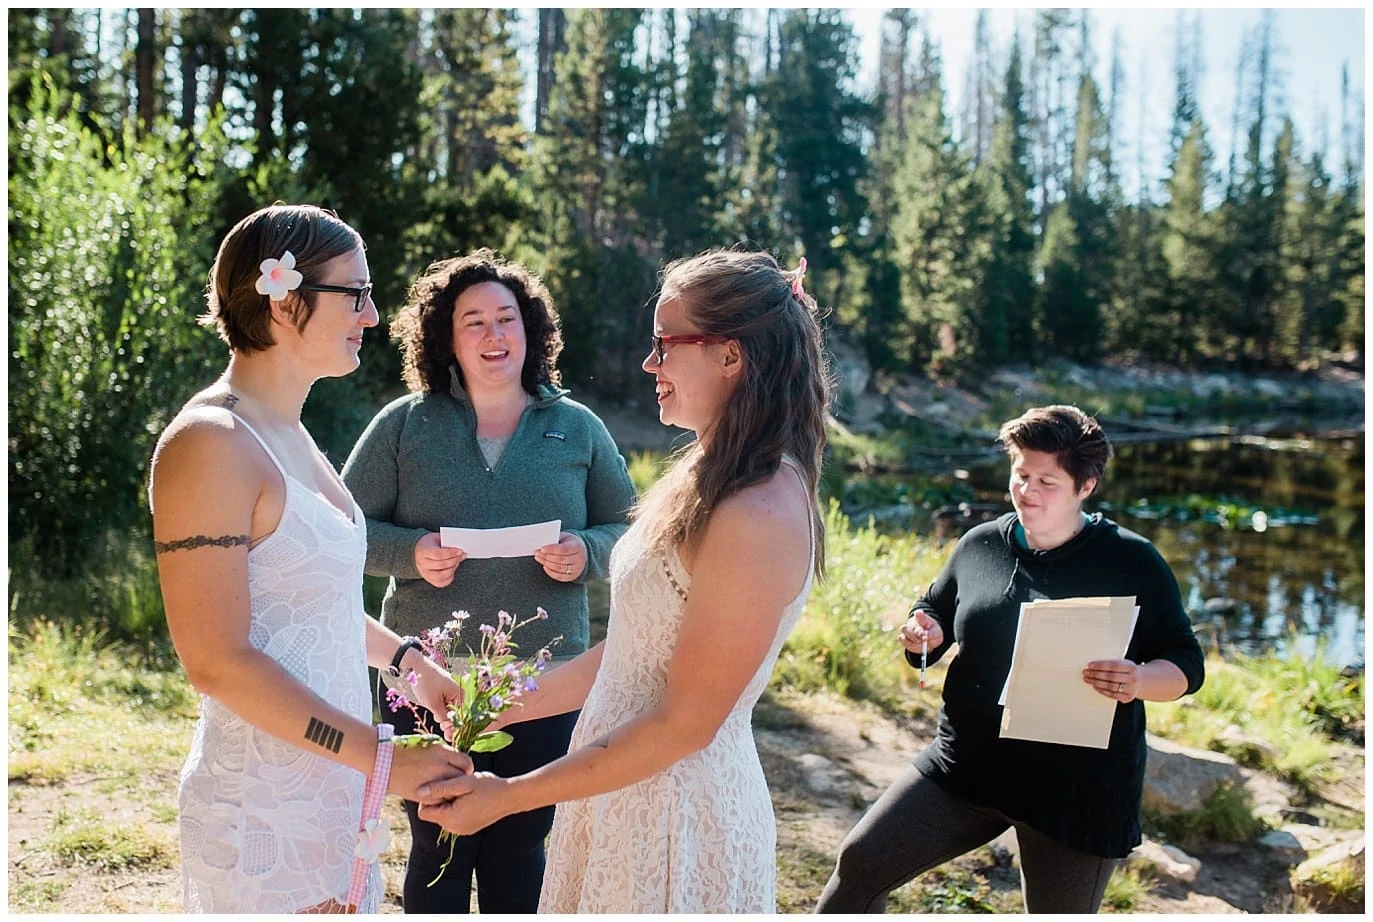 Vows by Lily Lake at sunrise photo